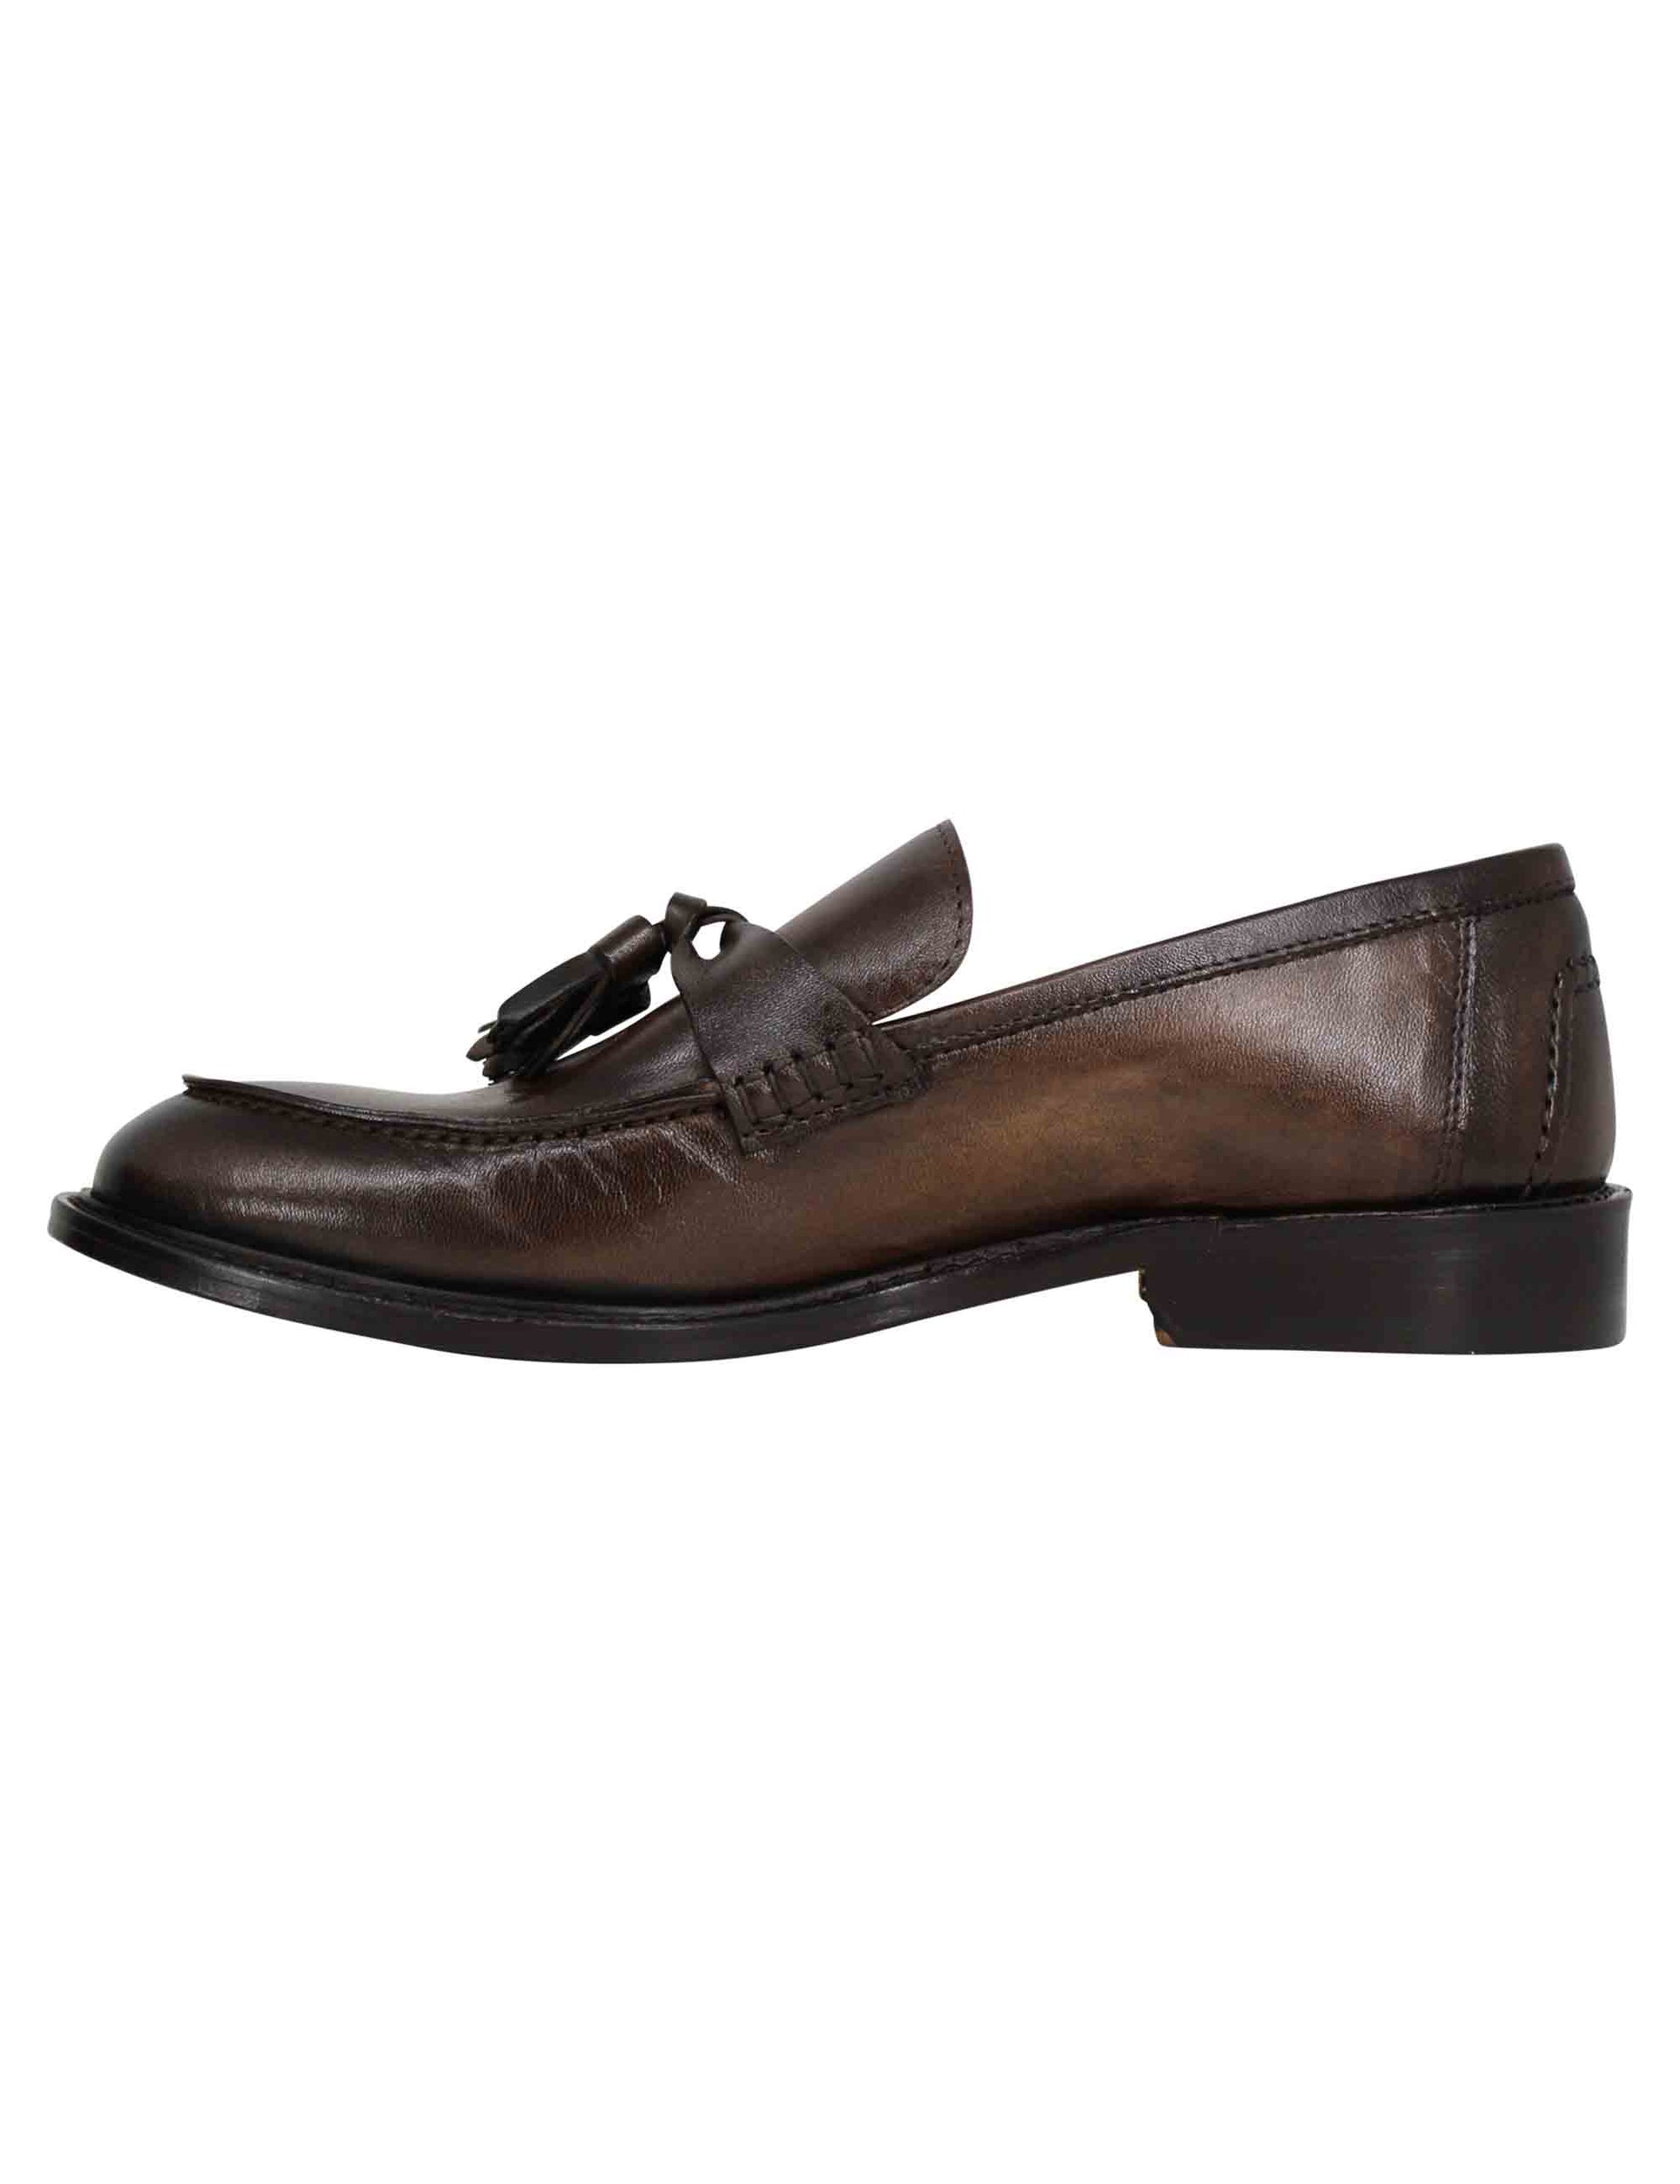 Men's brown leather loafers with bows and stitched leather sole